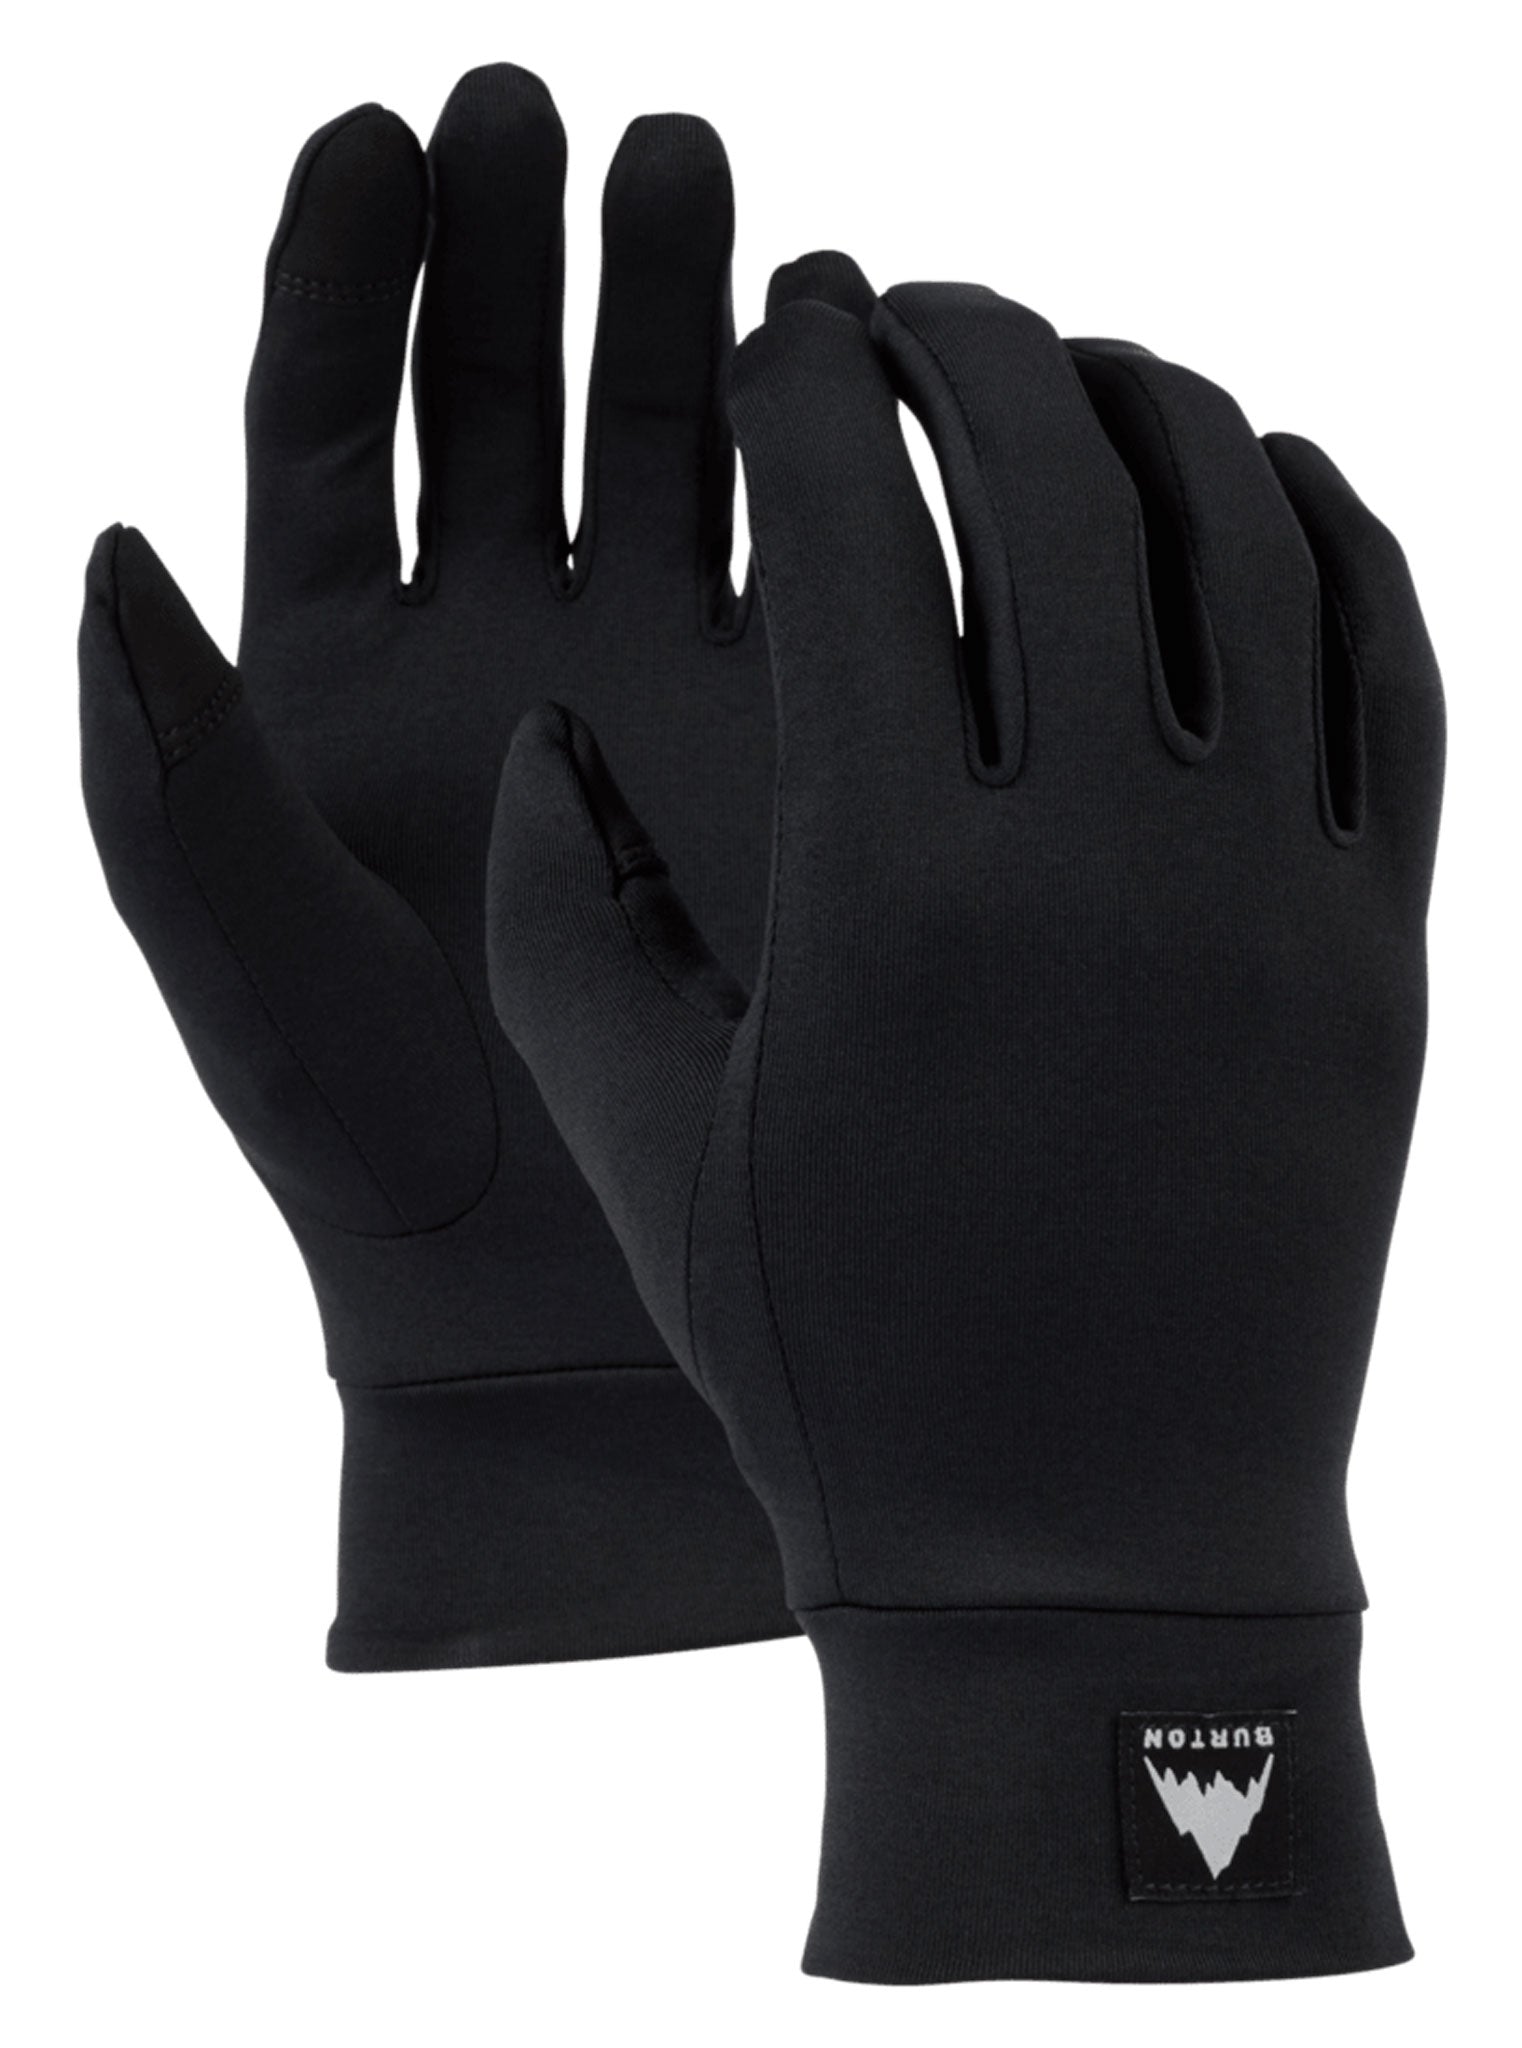 Touchscreen Glove Liners